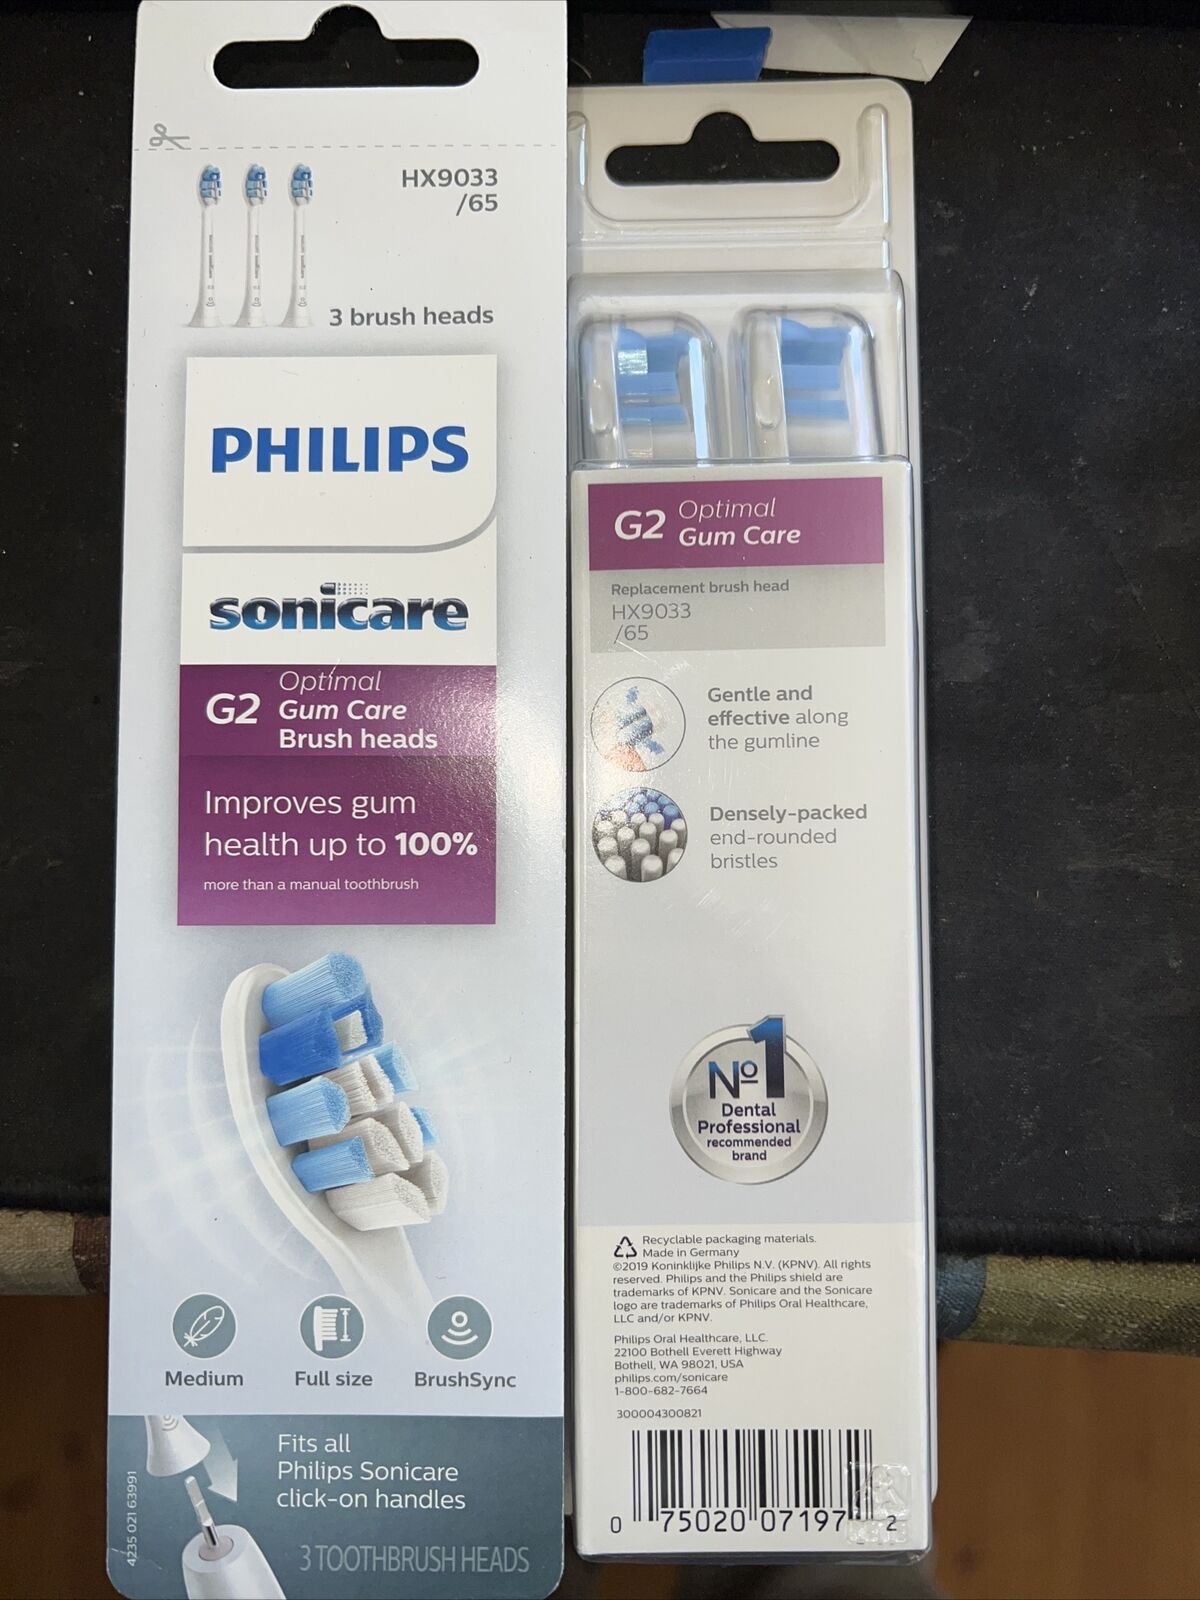 Philips Sonicare G2 Optimal Gum Care 3 HX903 White - Heads Selling and selling Challenge the lowest price of Japan ☆ Brush